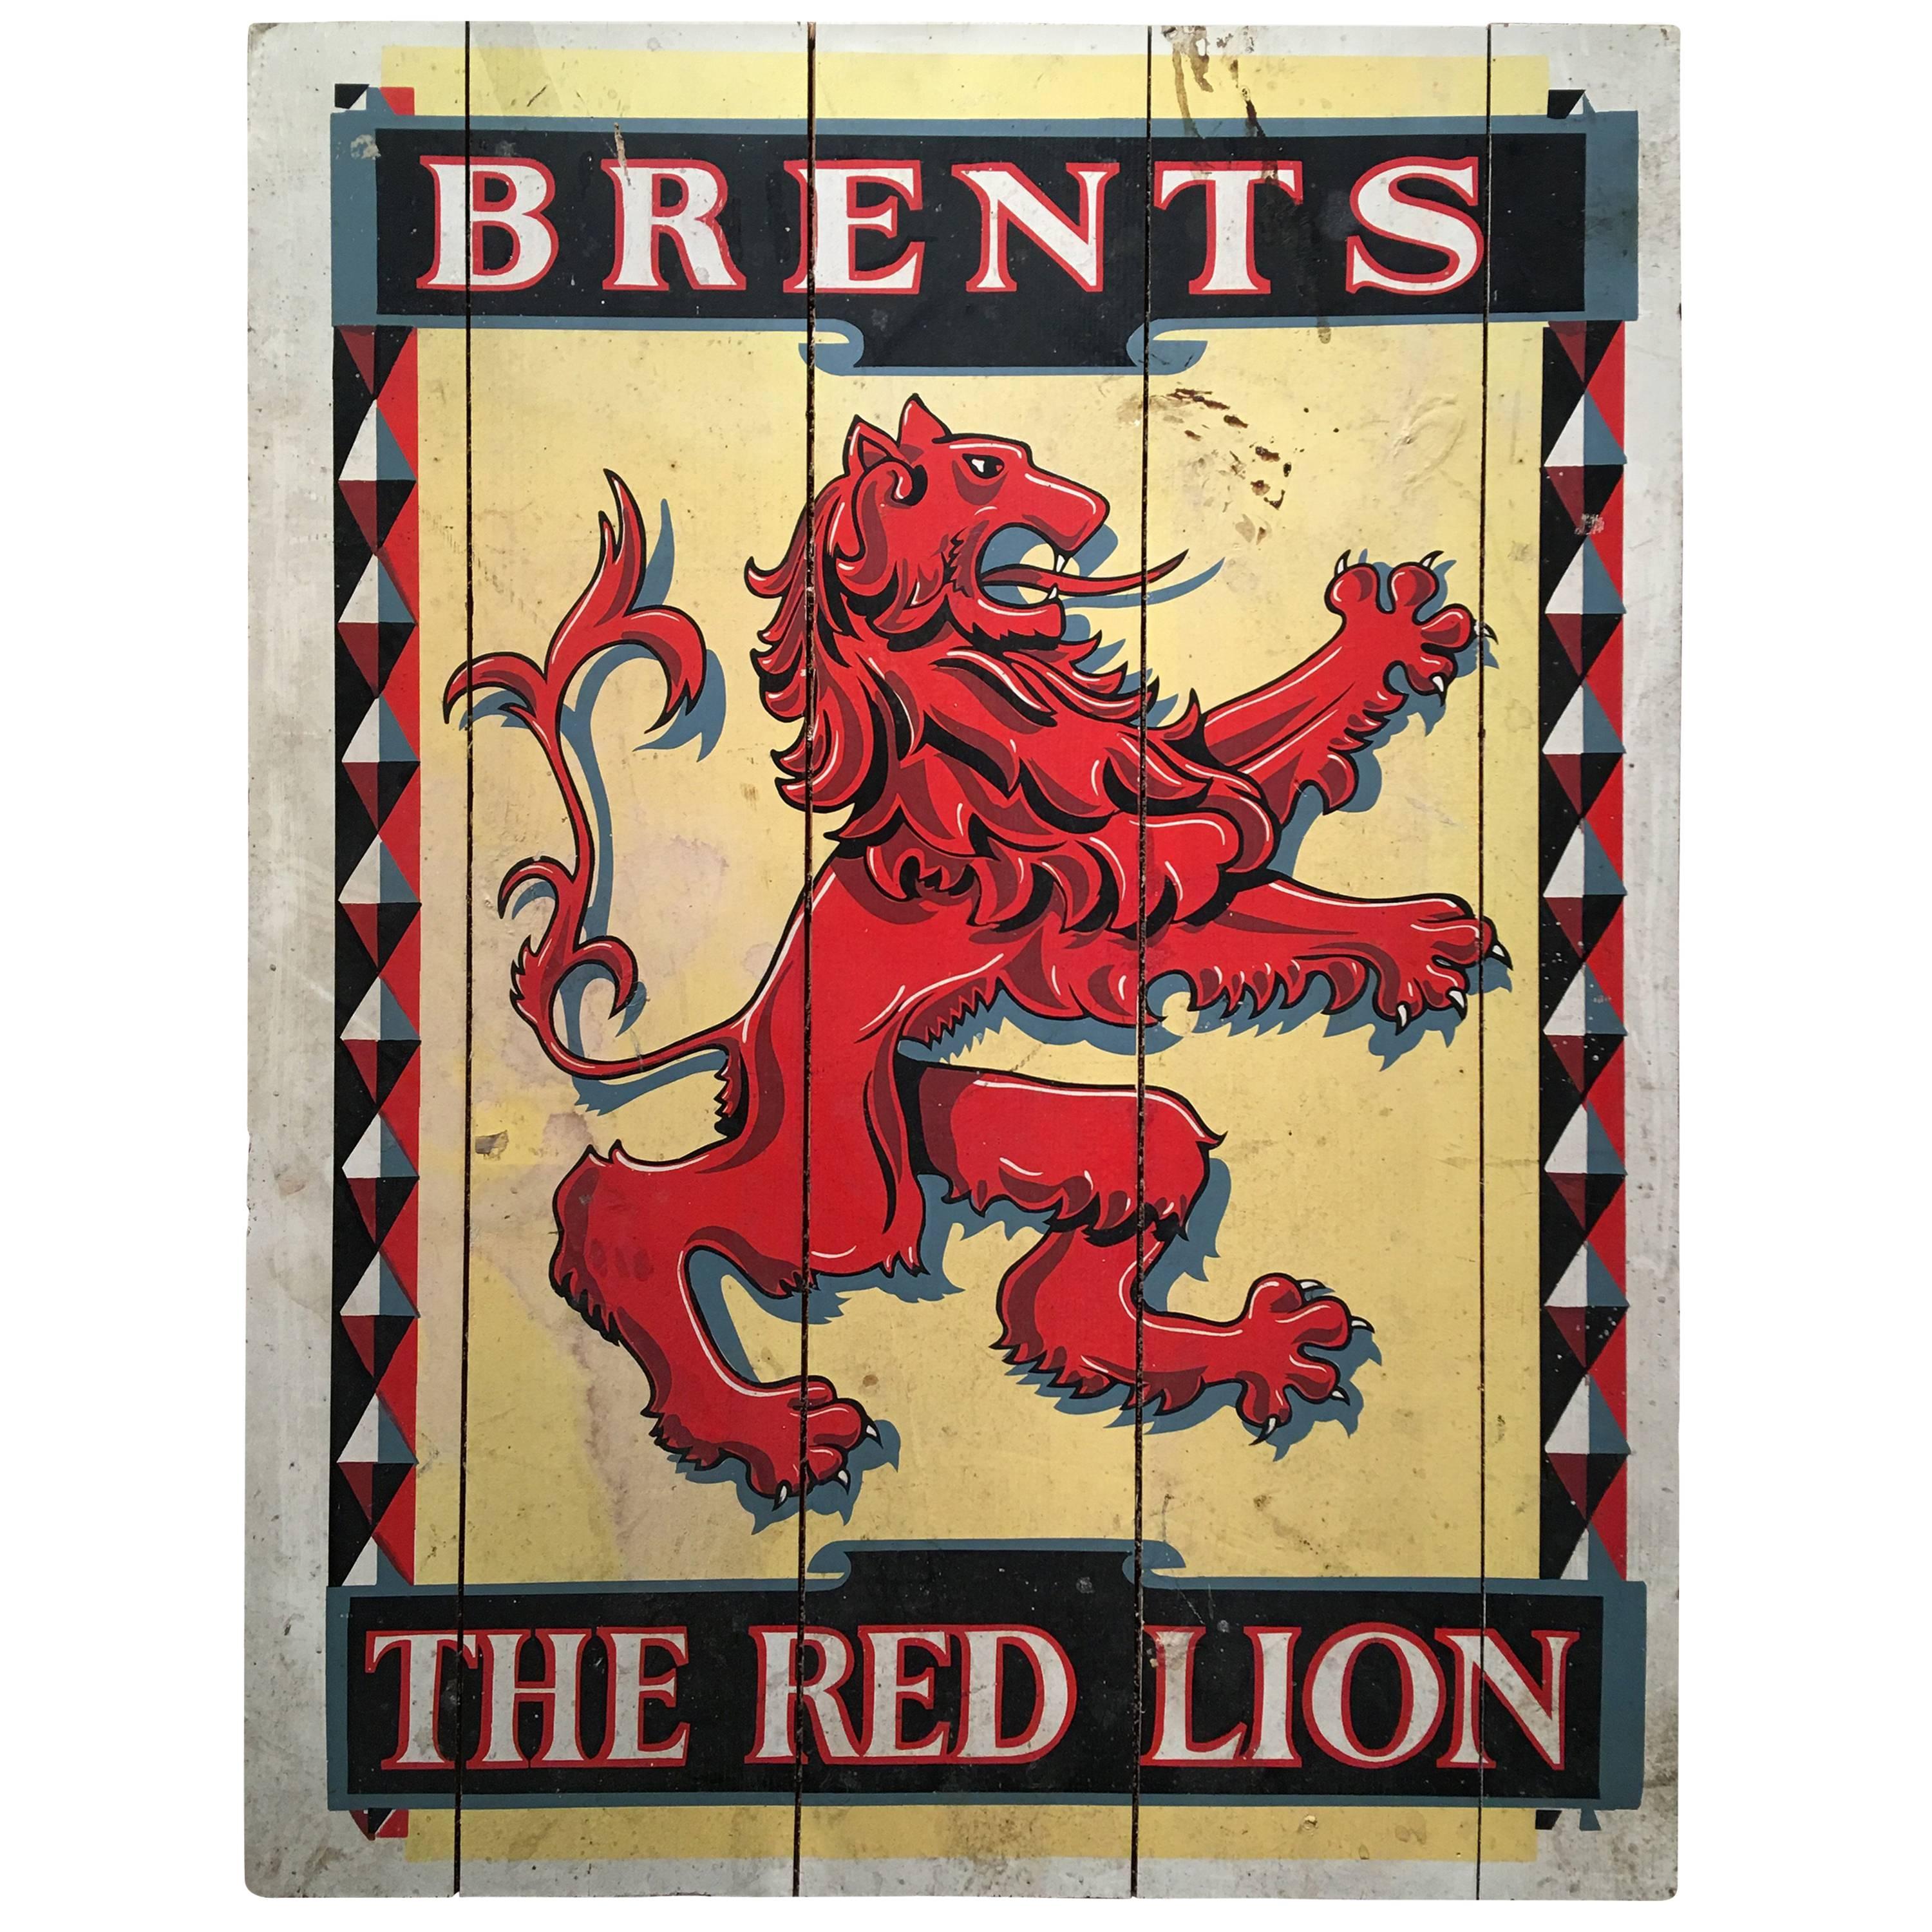 English Pub Sign, "Brents The Red Lion, " Late 19th Century